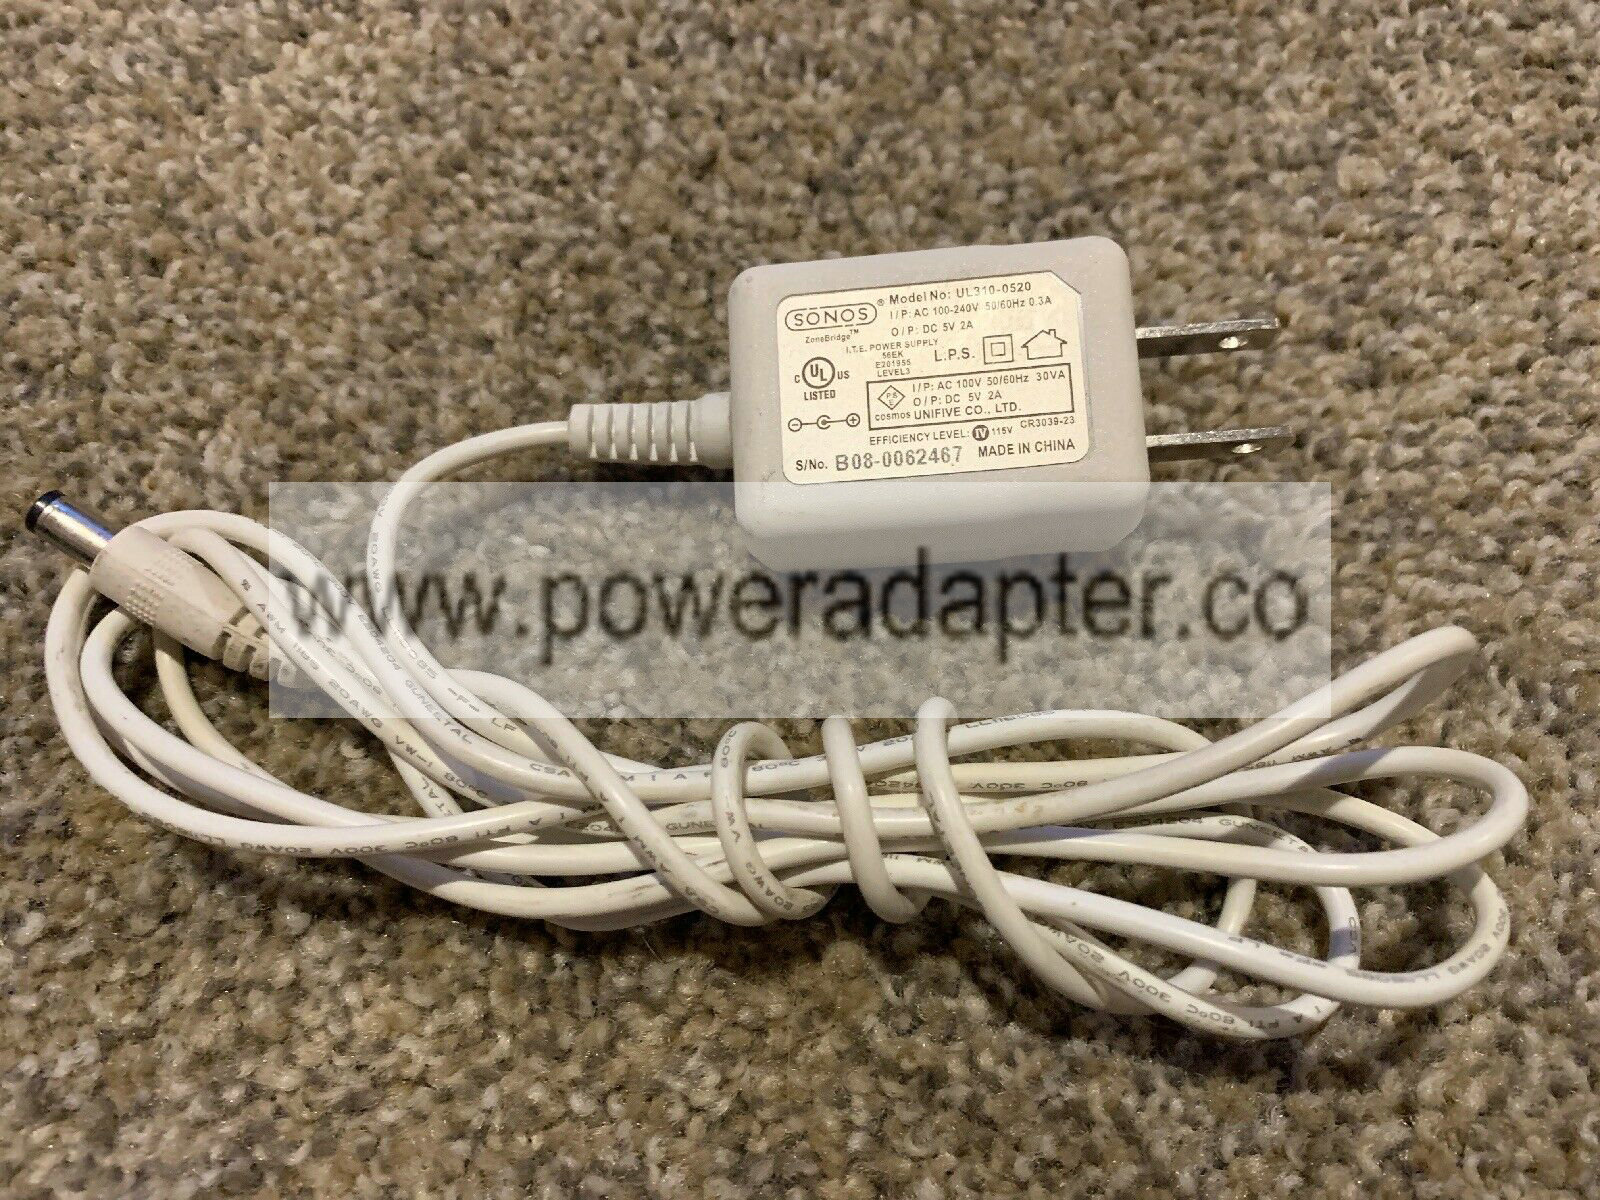 SONOS UL310-0520 POWER SUPPLY 6ft. CABLE ADAPTER 5V AC SONOS UL310-0520 POWER SUPPLY 6ft. CABLE ADAPTER 5V AC. Condit